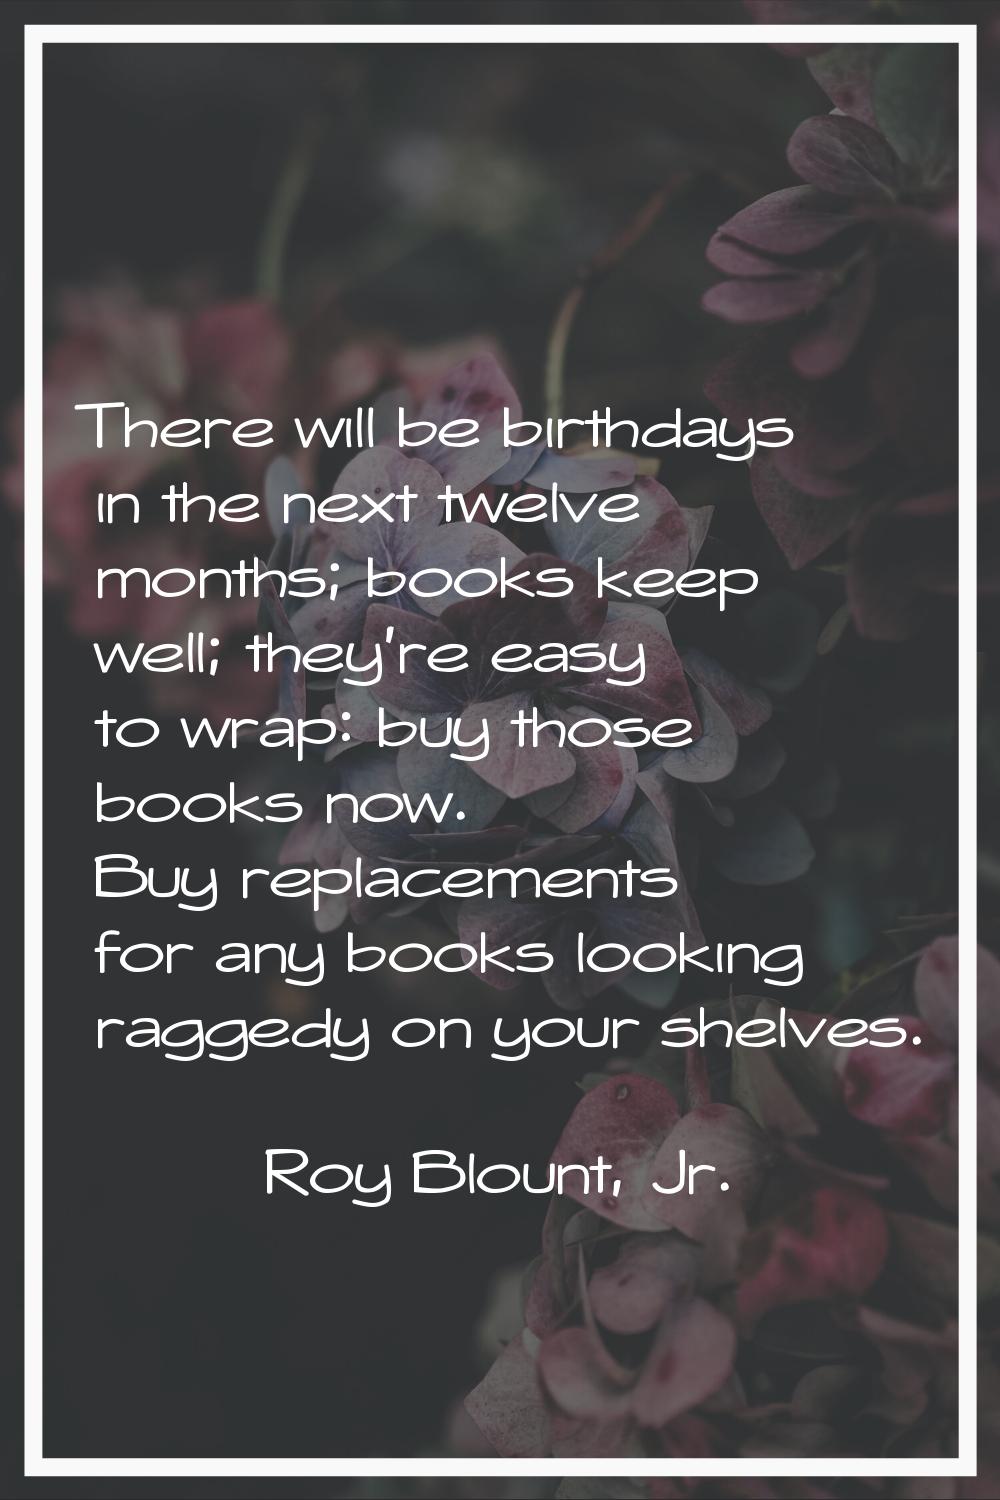 There will be birthdays in the next twelve months; books keep well; they're easy to wrap: buy those